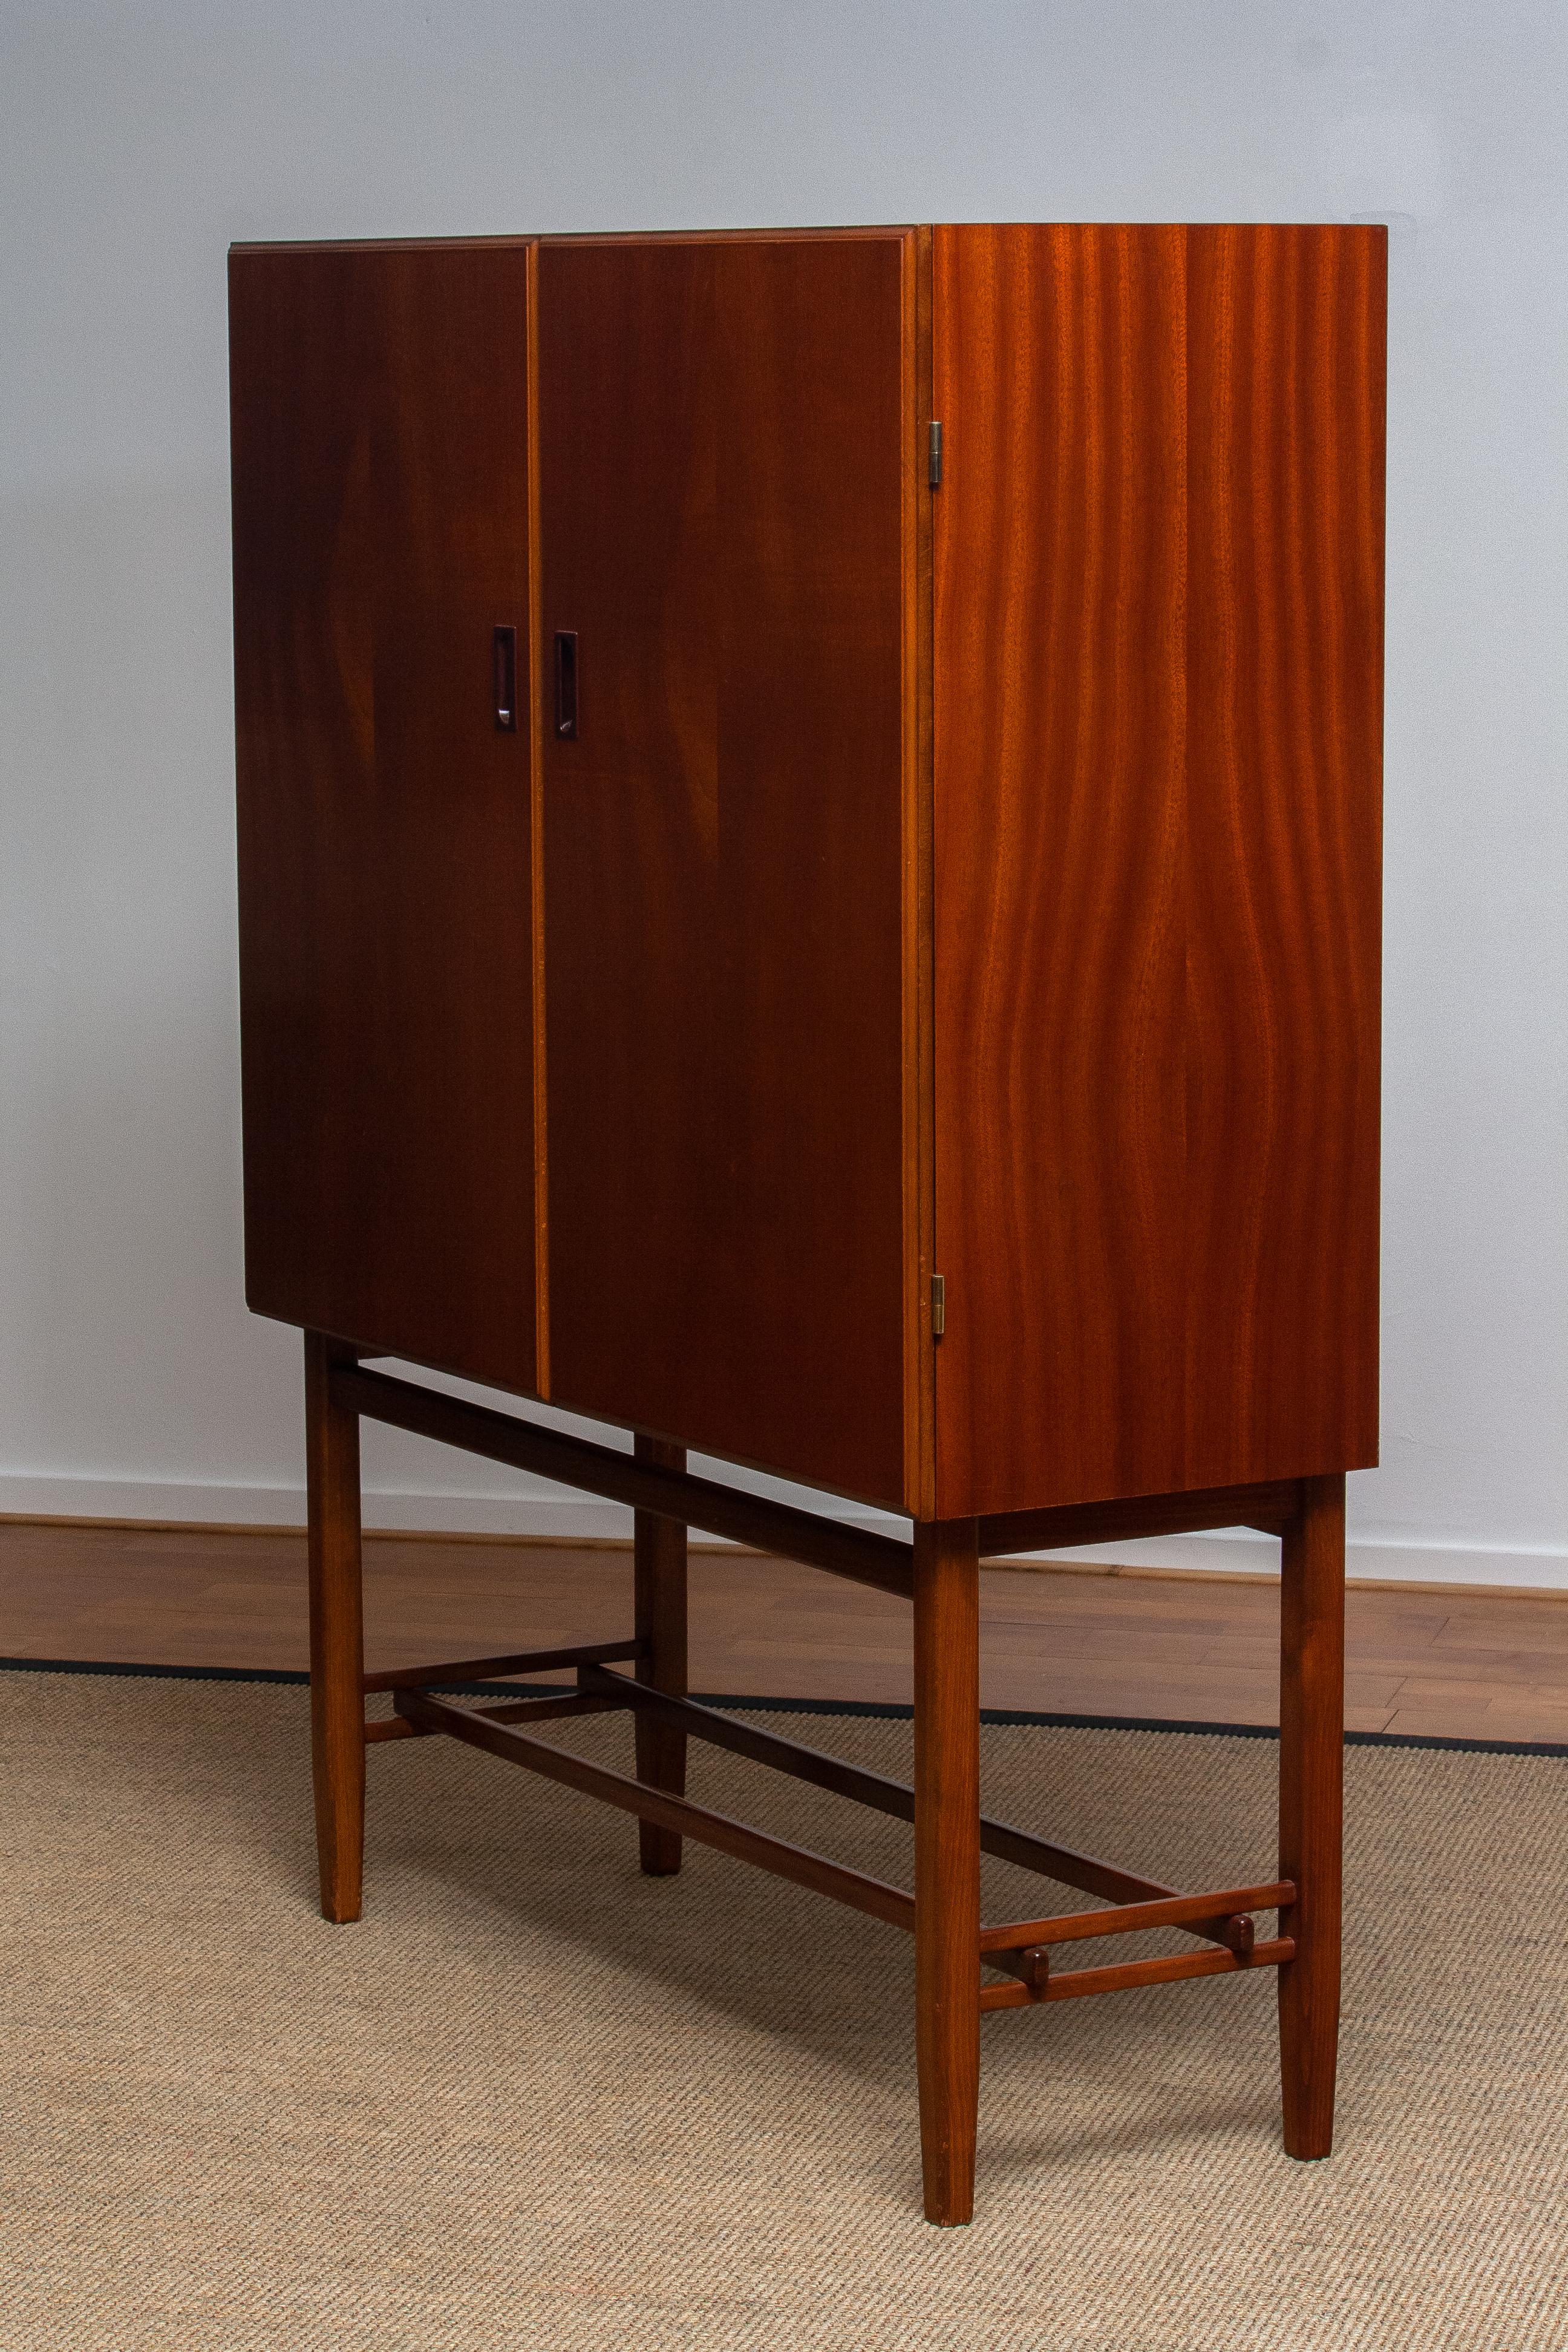 Mid-Century Modern 1950s, Slim Midcentury Mahogany Dry Bar / Cabinet by Forenades Mobler, Sweden